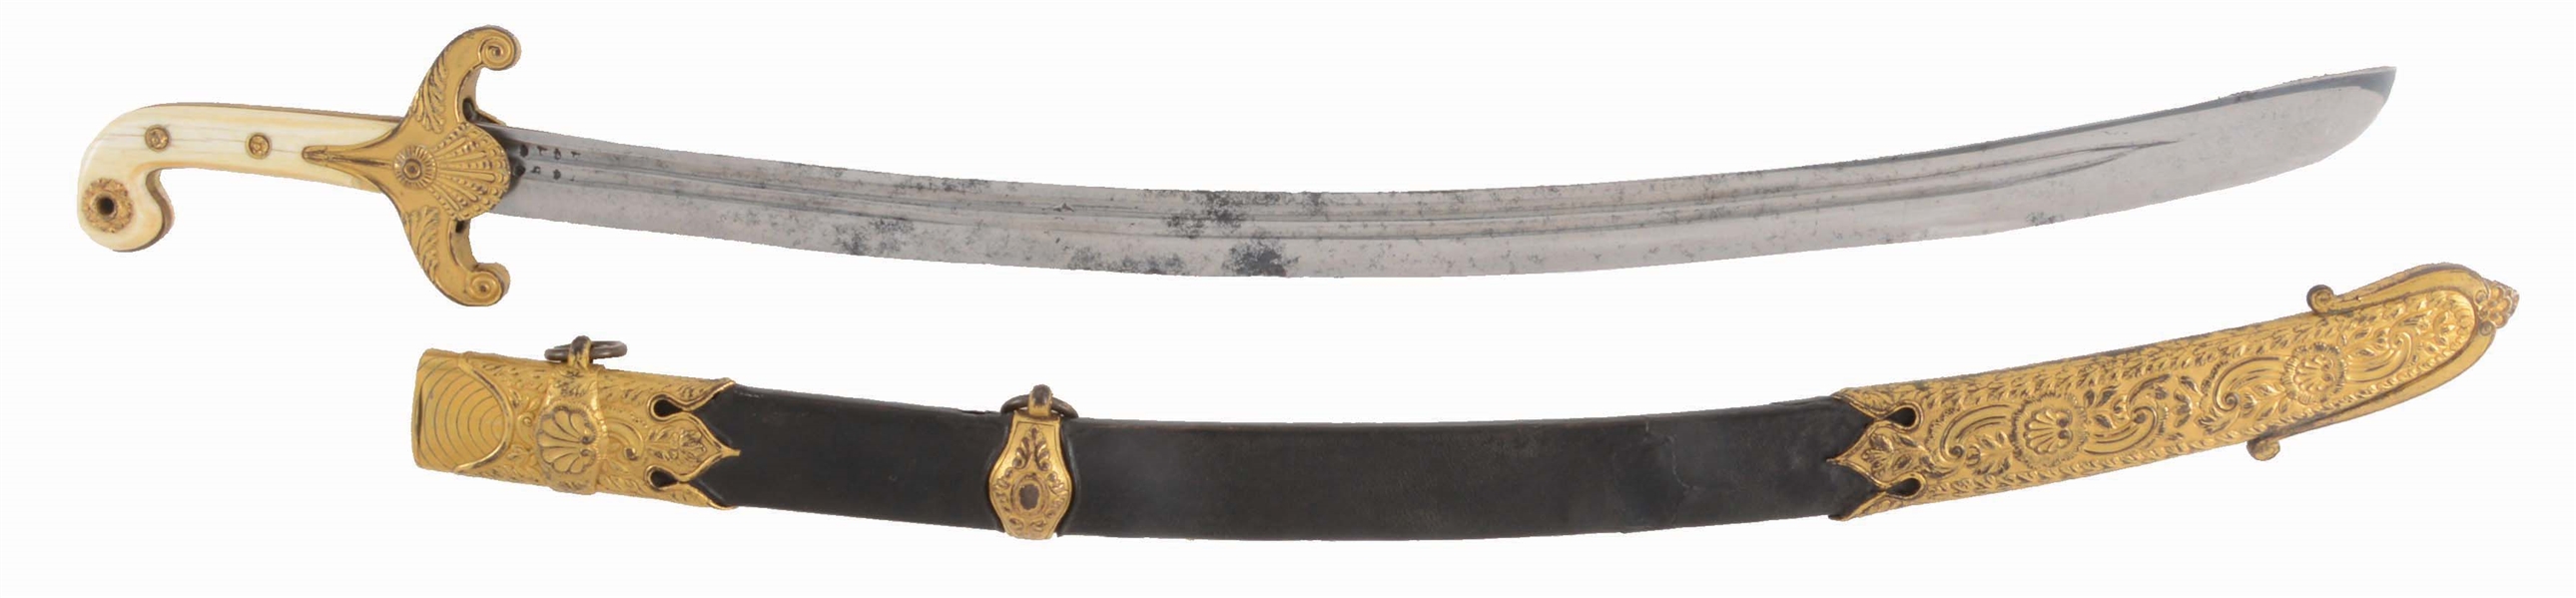 A MOST ATTRACTIVE GILT BRONZE MAMELUK HILTED OFFICERS SWORD BY THE FAMOUS MAKER PROSSER, CHARING CROSS, LONDON, AND DATED ON THE LOCKET 1813.